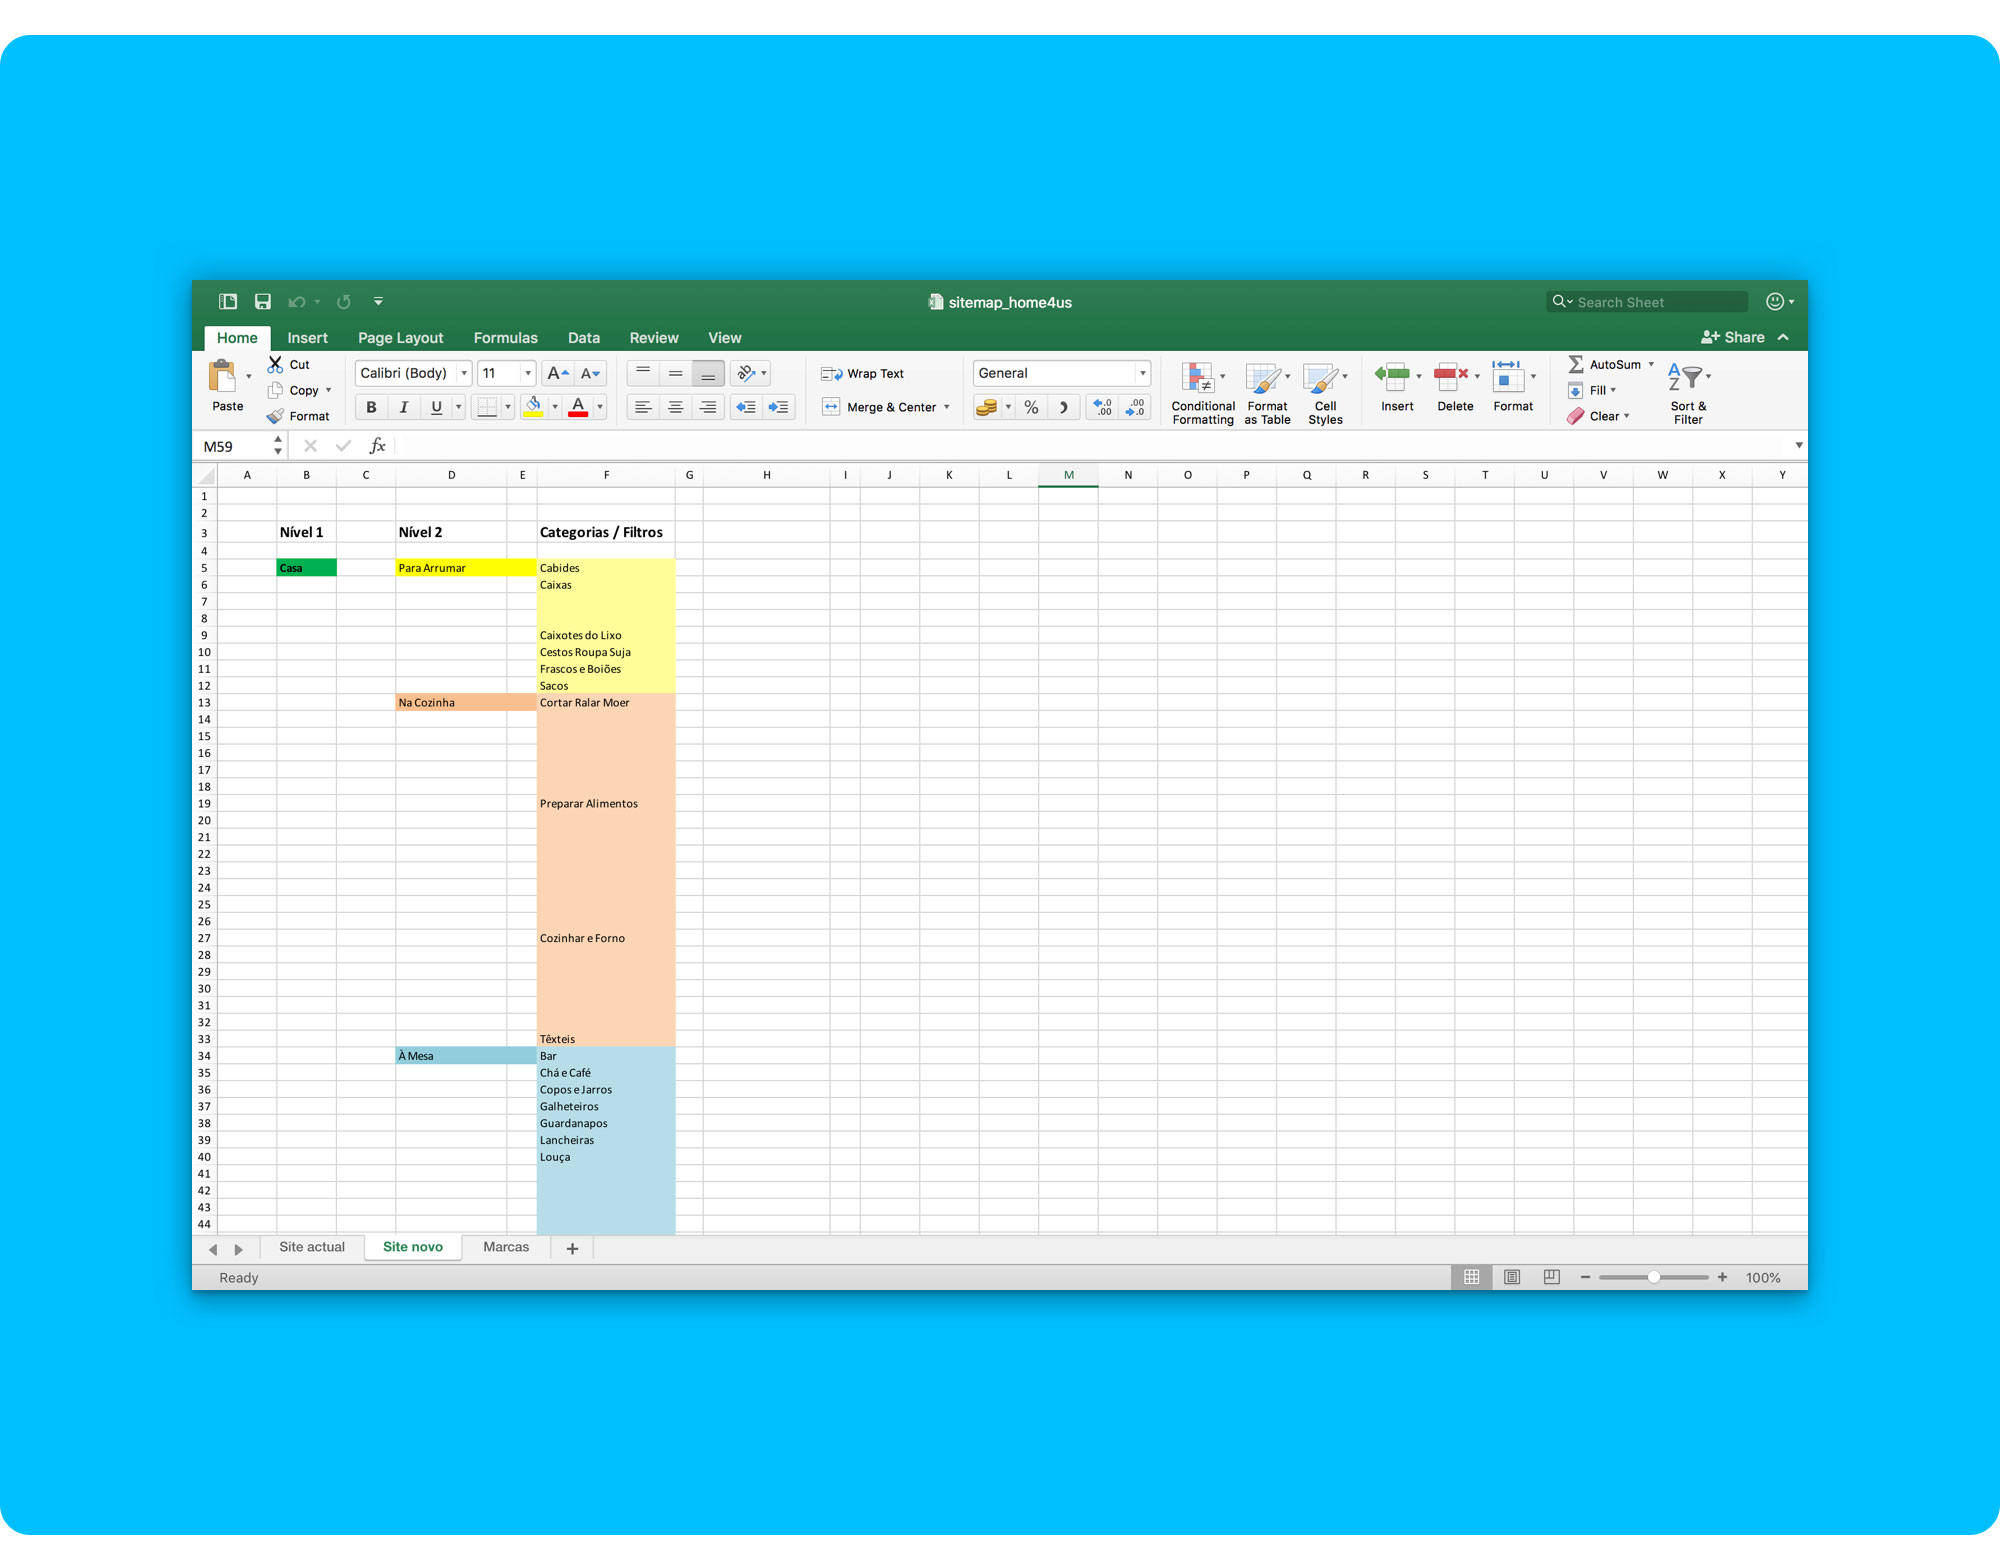 Excel spreadsheet with the new information architecture — final version